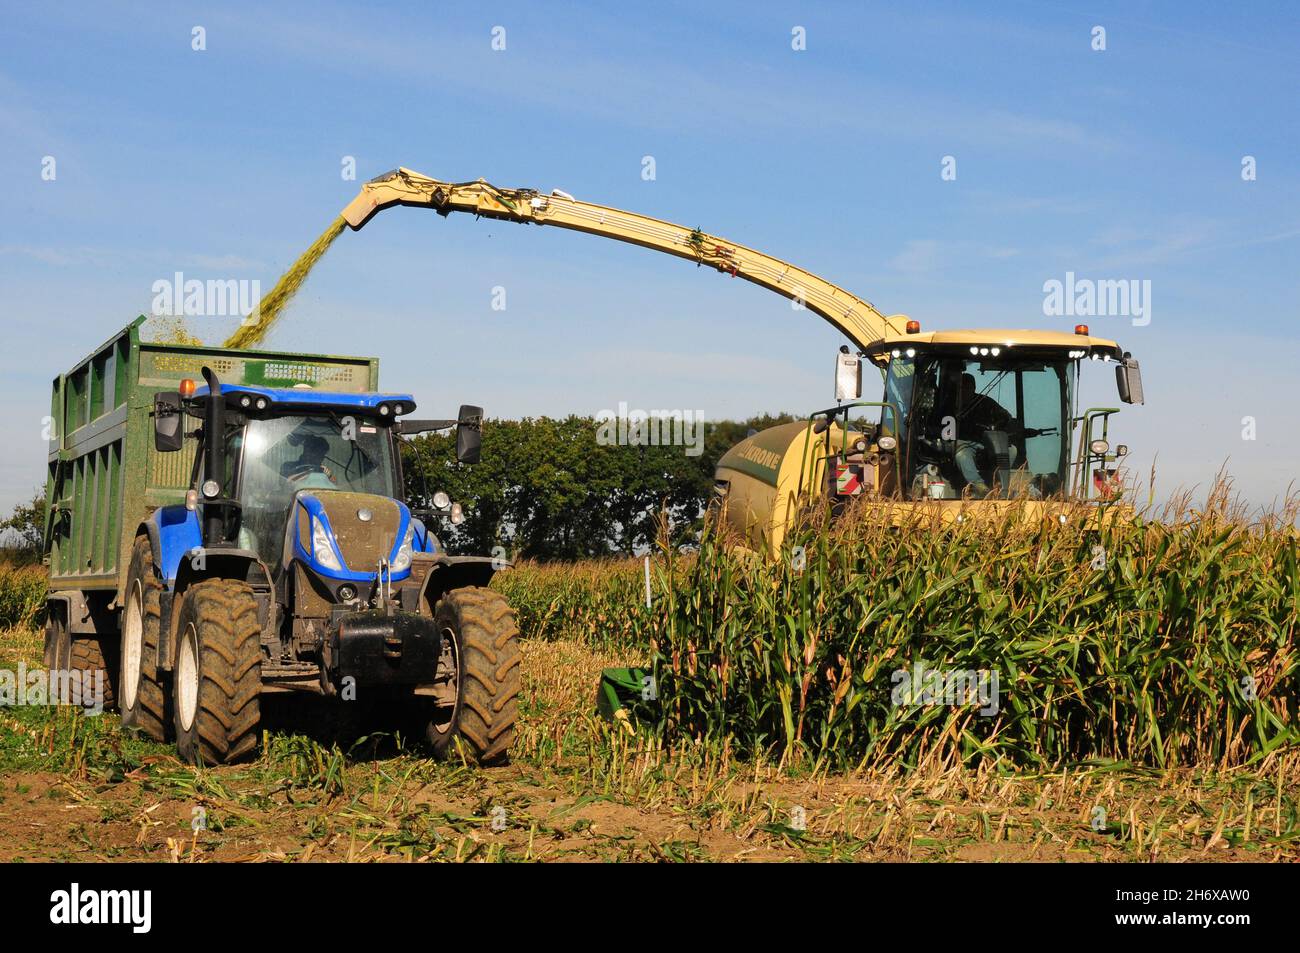 Forage harvester harvesting maize for cattle feed, shooting ground up maize into trailer. Stock Photo